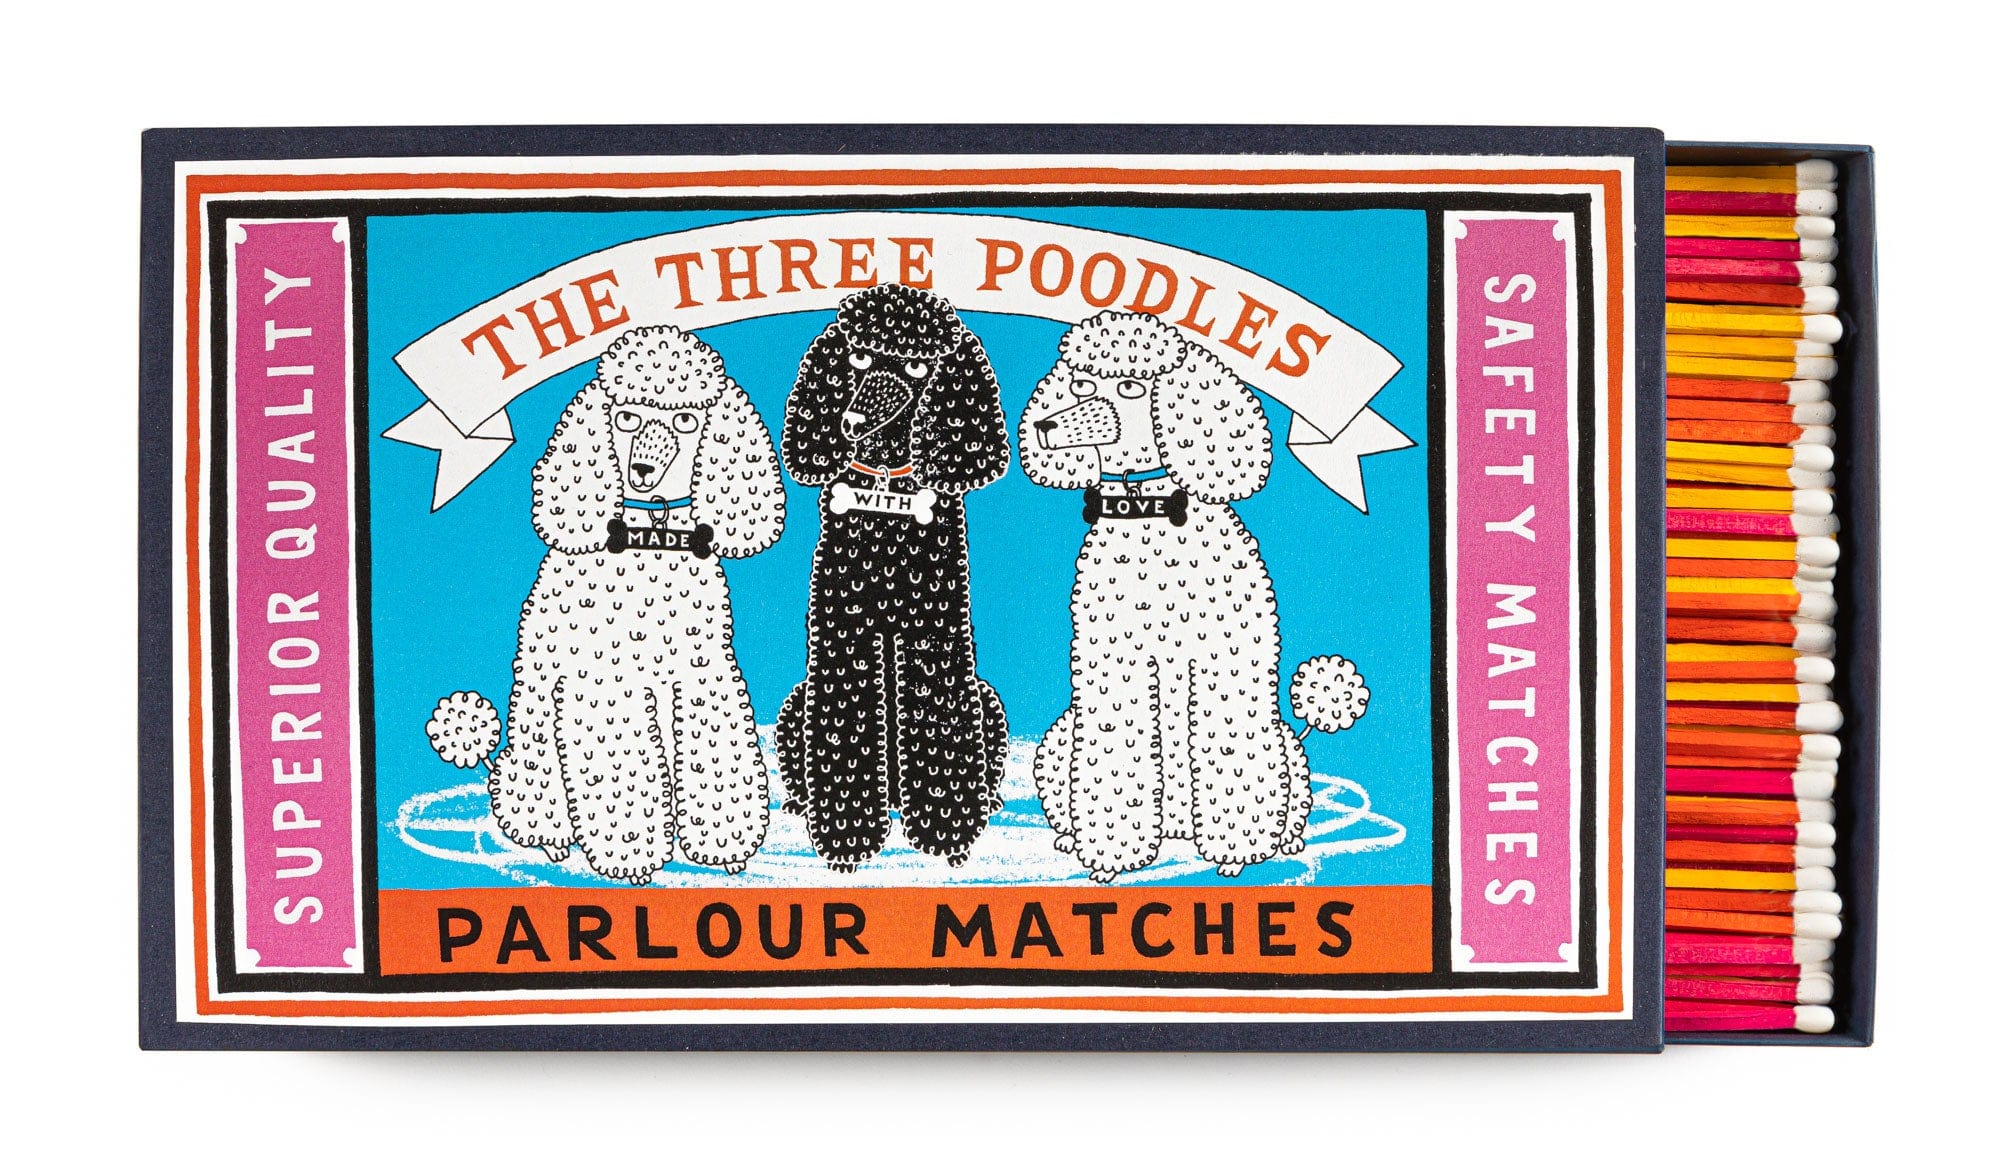 Giant Luxury Matches The Three Poodles